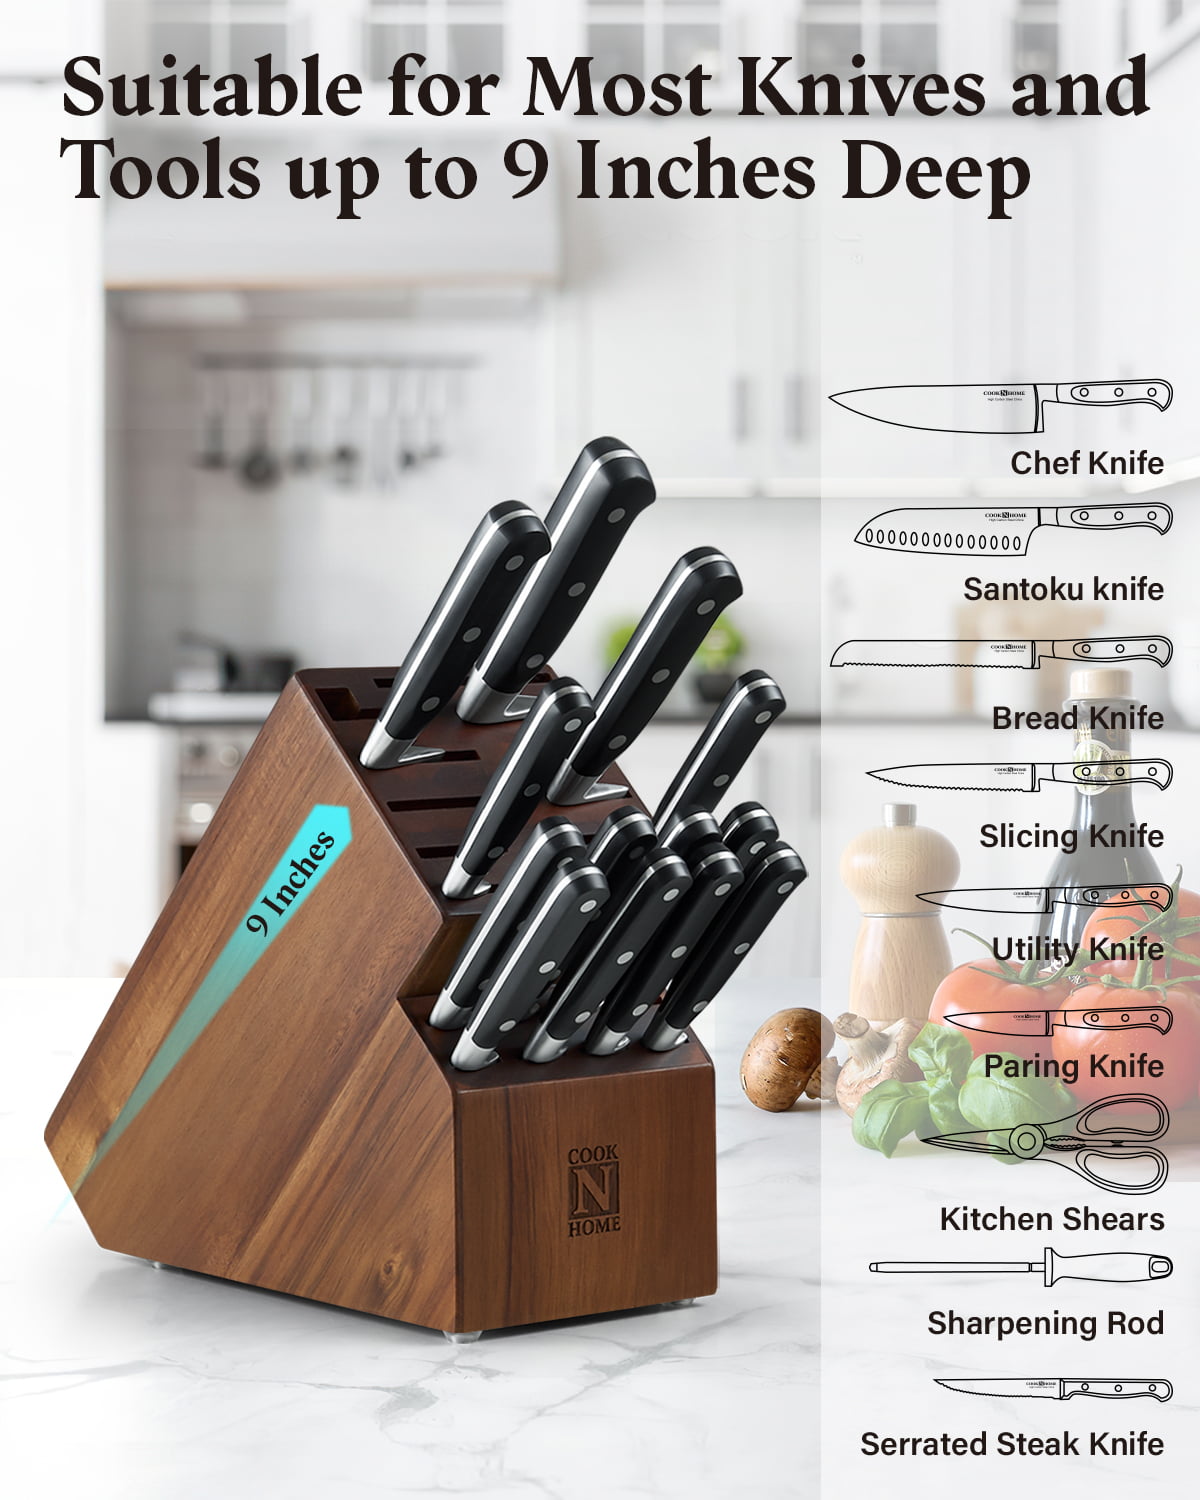 VEVOR Universal Knife Holder, Acacia Wood Knife Block Without Knives, Extra  Large Knife Storage Holder Stand with PP Brush, Multifunctional Wooden